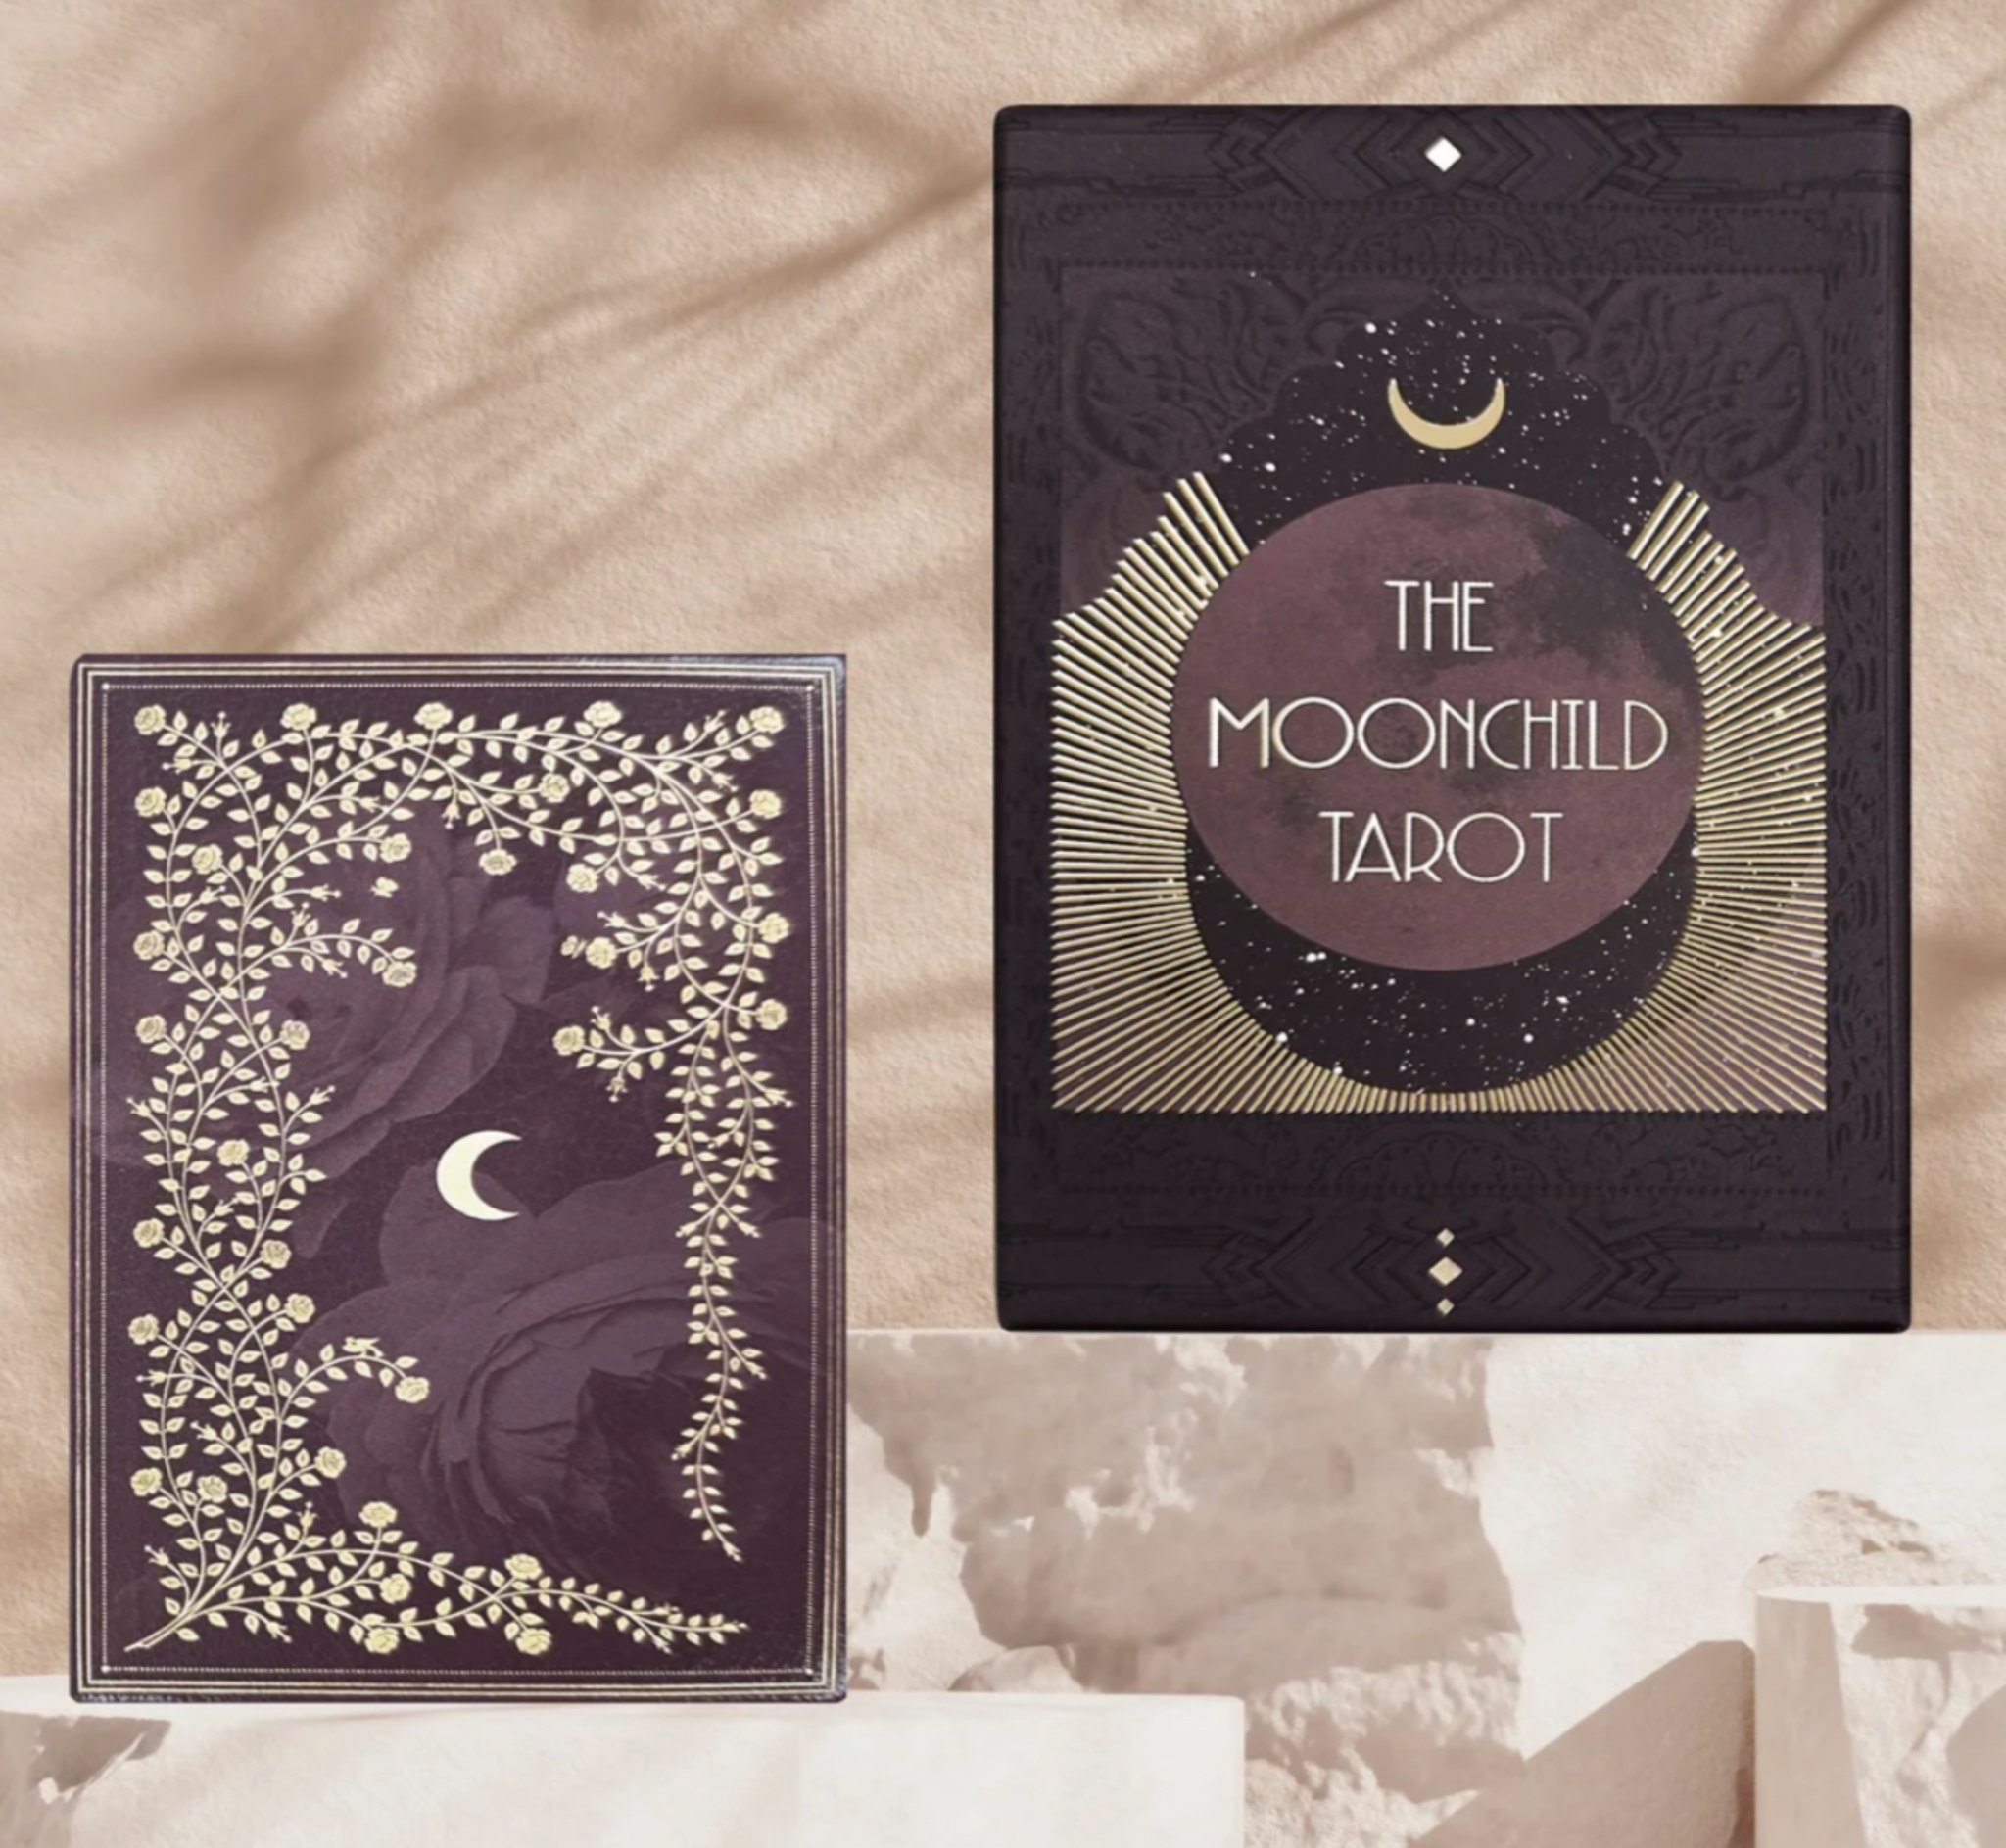 The Moonchild Tarot Shadow Edition by Danielle Noel – a west style 